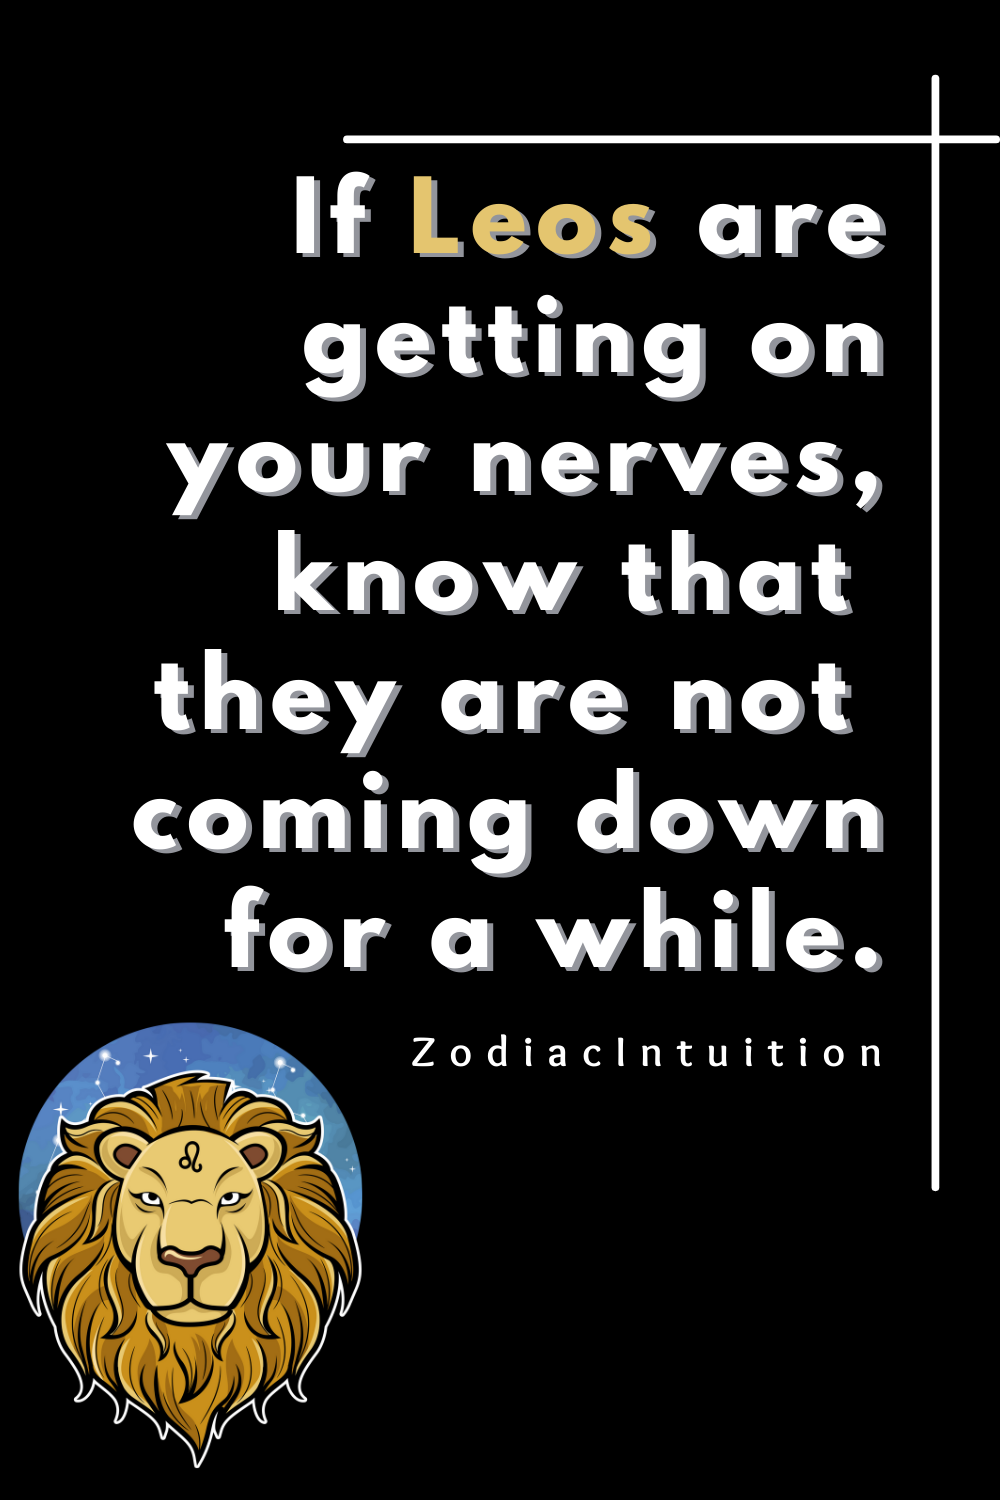 Leo Zodiac Sign Unleashed: 10 Quotes Igniting Zodiac Fire!